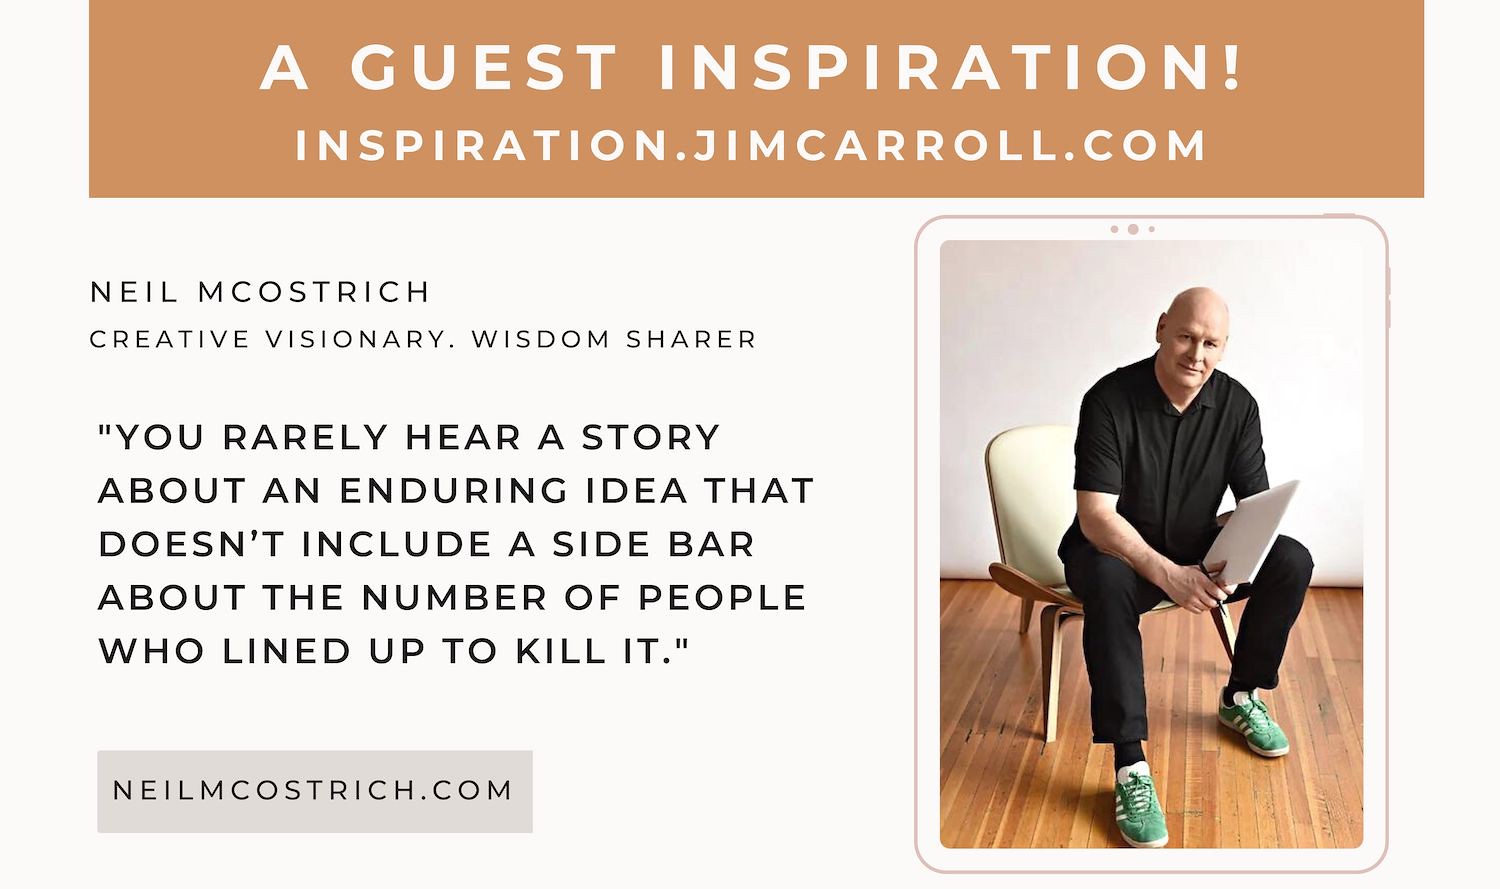 "You rarely hear a story about an enduring idea that doesn't include a sidebar about the number of people who lined up to kill it." - Neil McOstrich